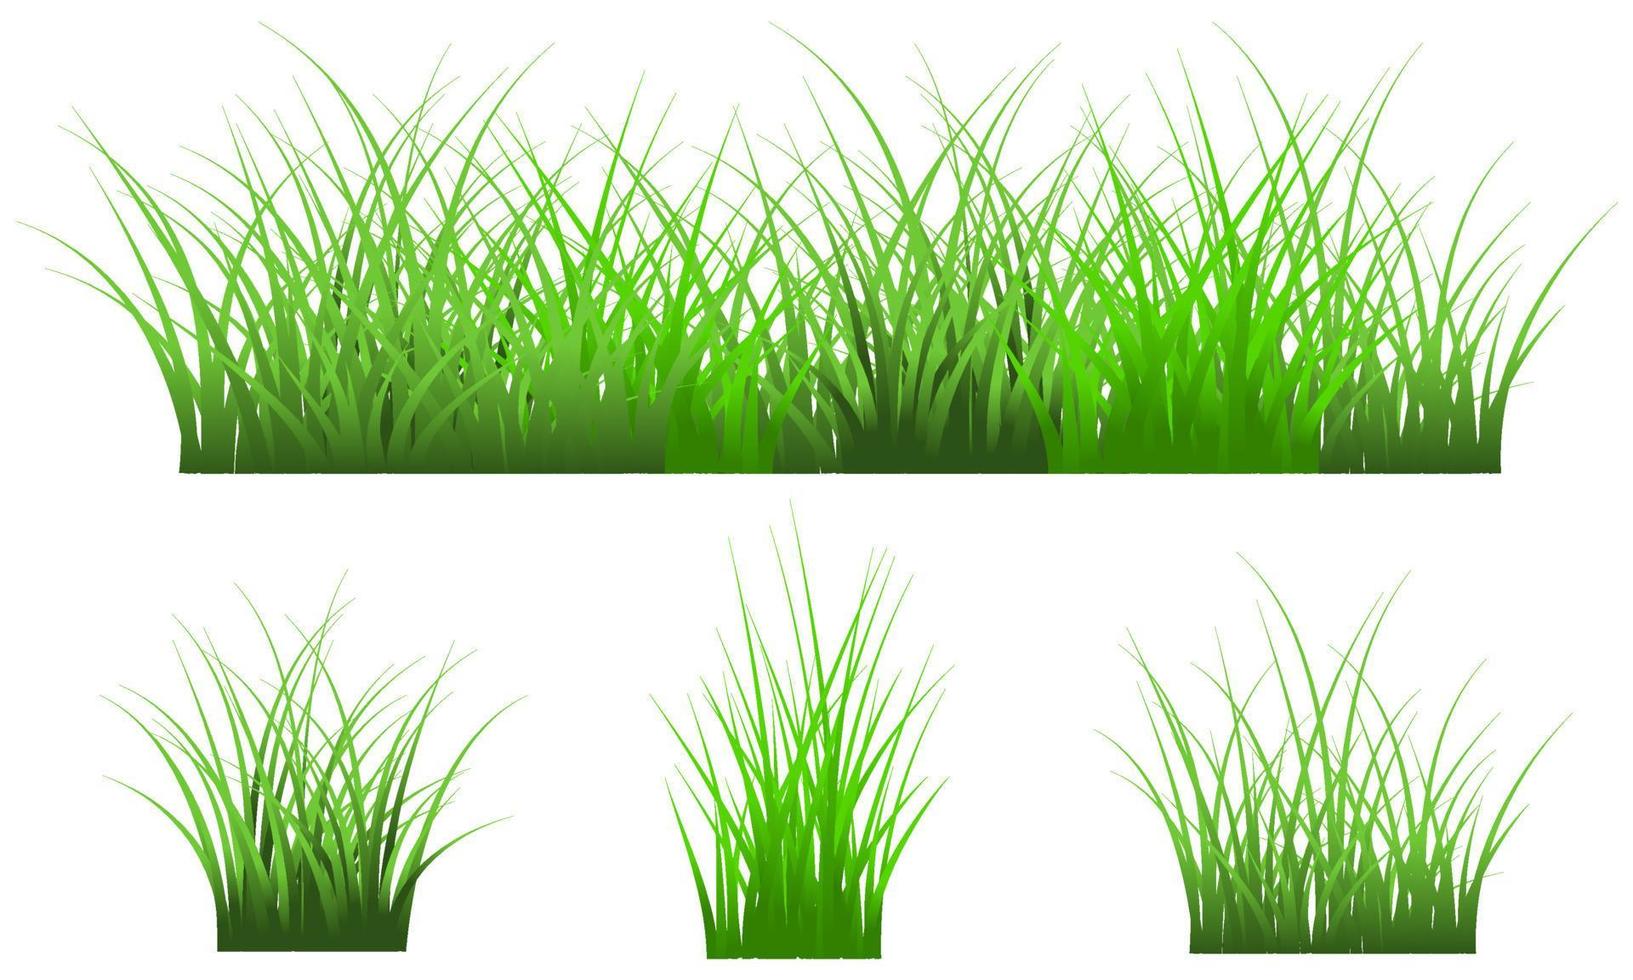 green grass isolated on white background, free vector grass set